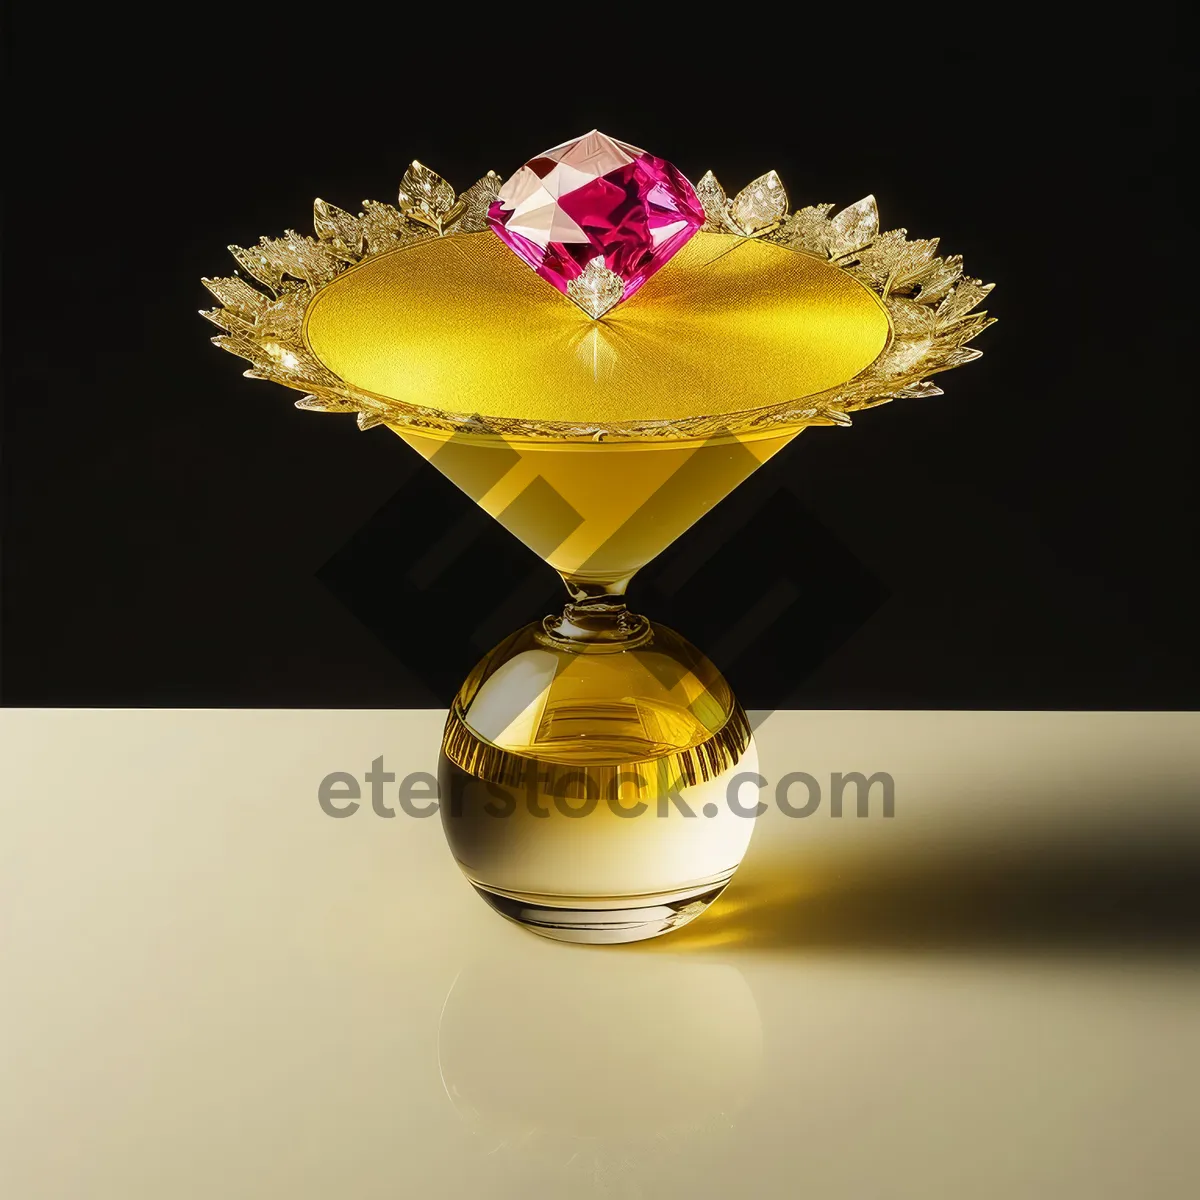 Picture of Transparent Martini: Timeless Cocktail Elegance with a Twist